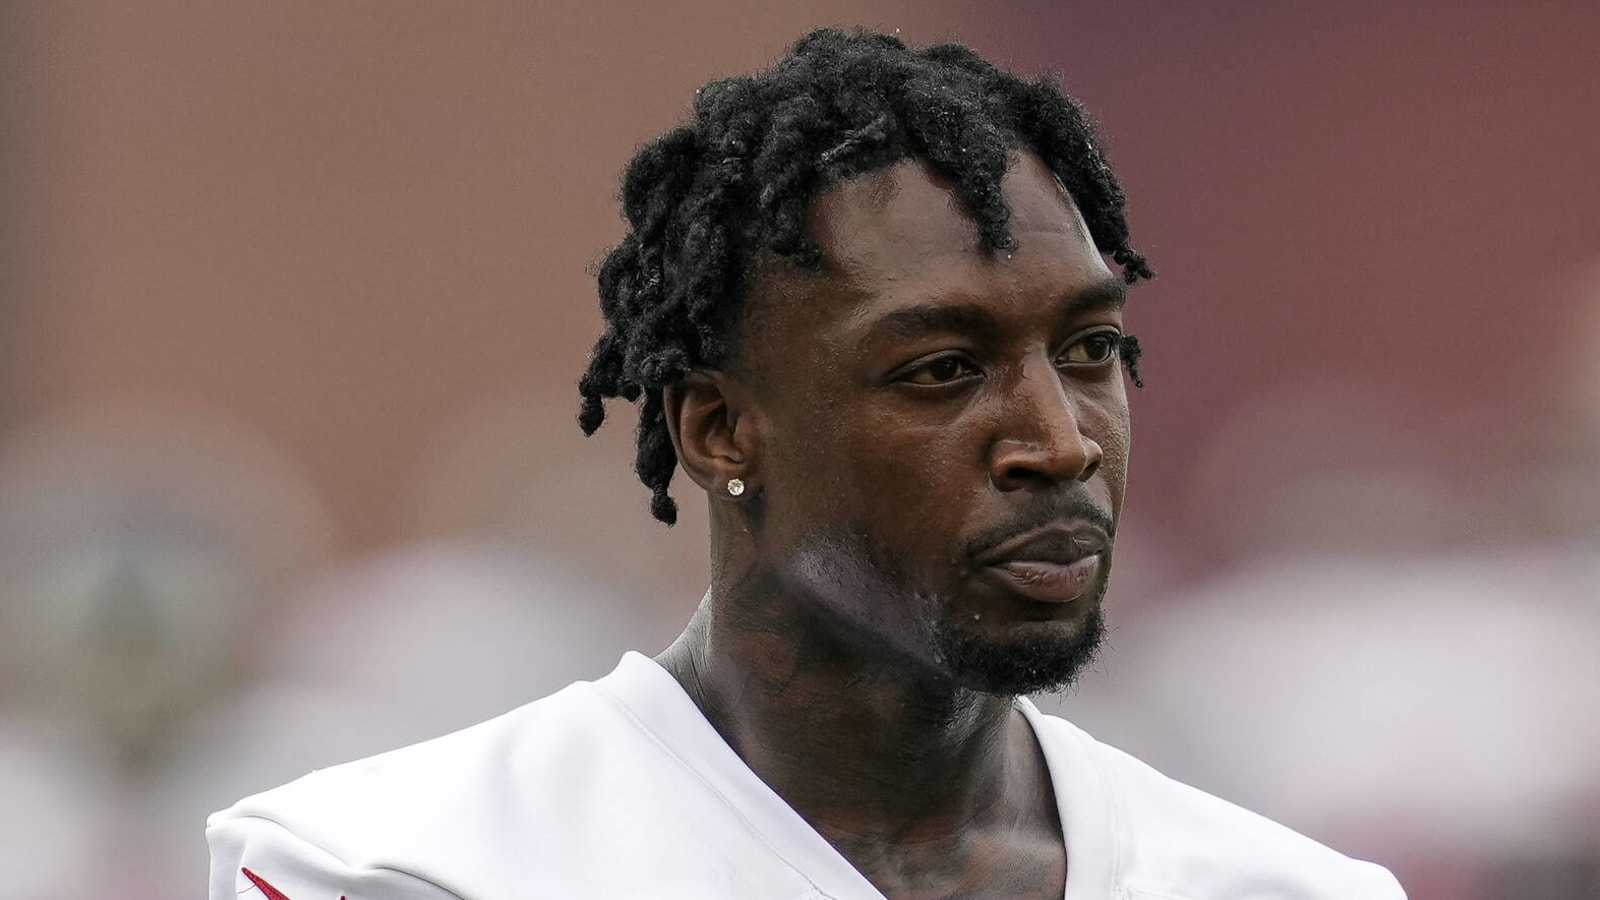 Calvin Ridley opens up about suspension in open letter